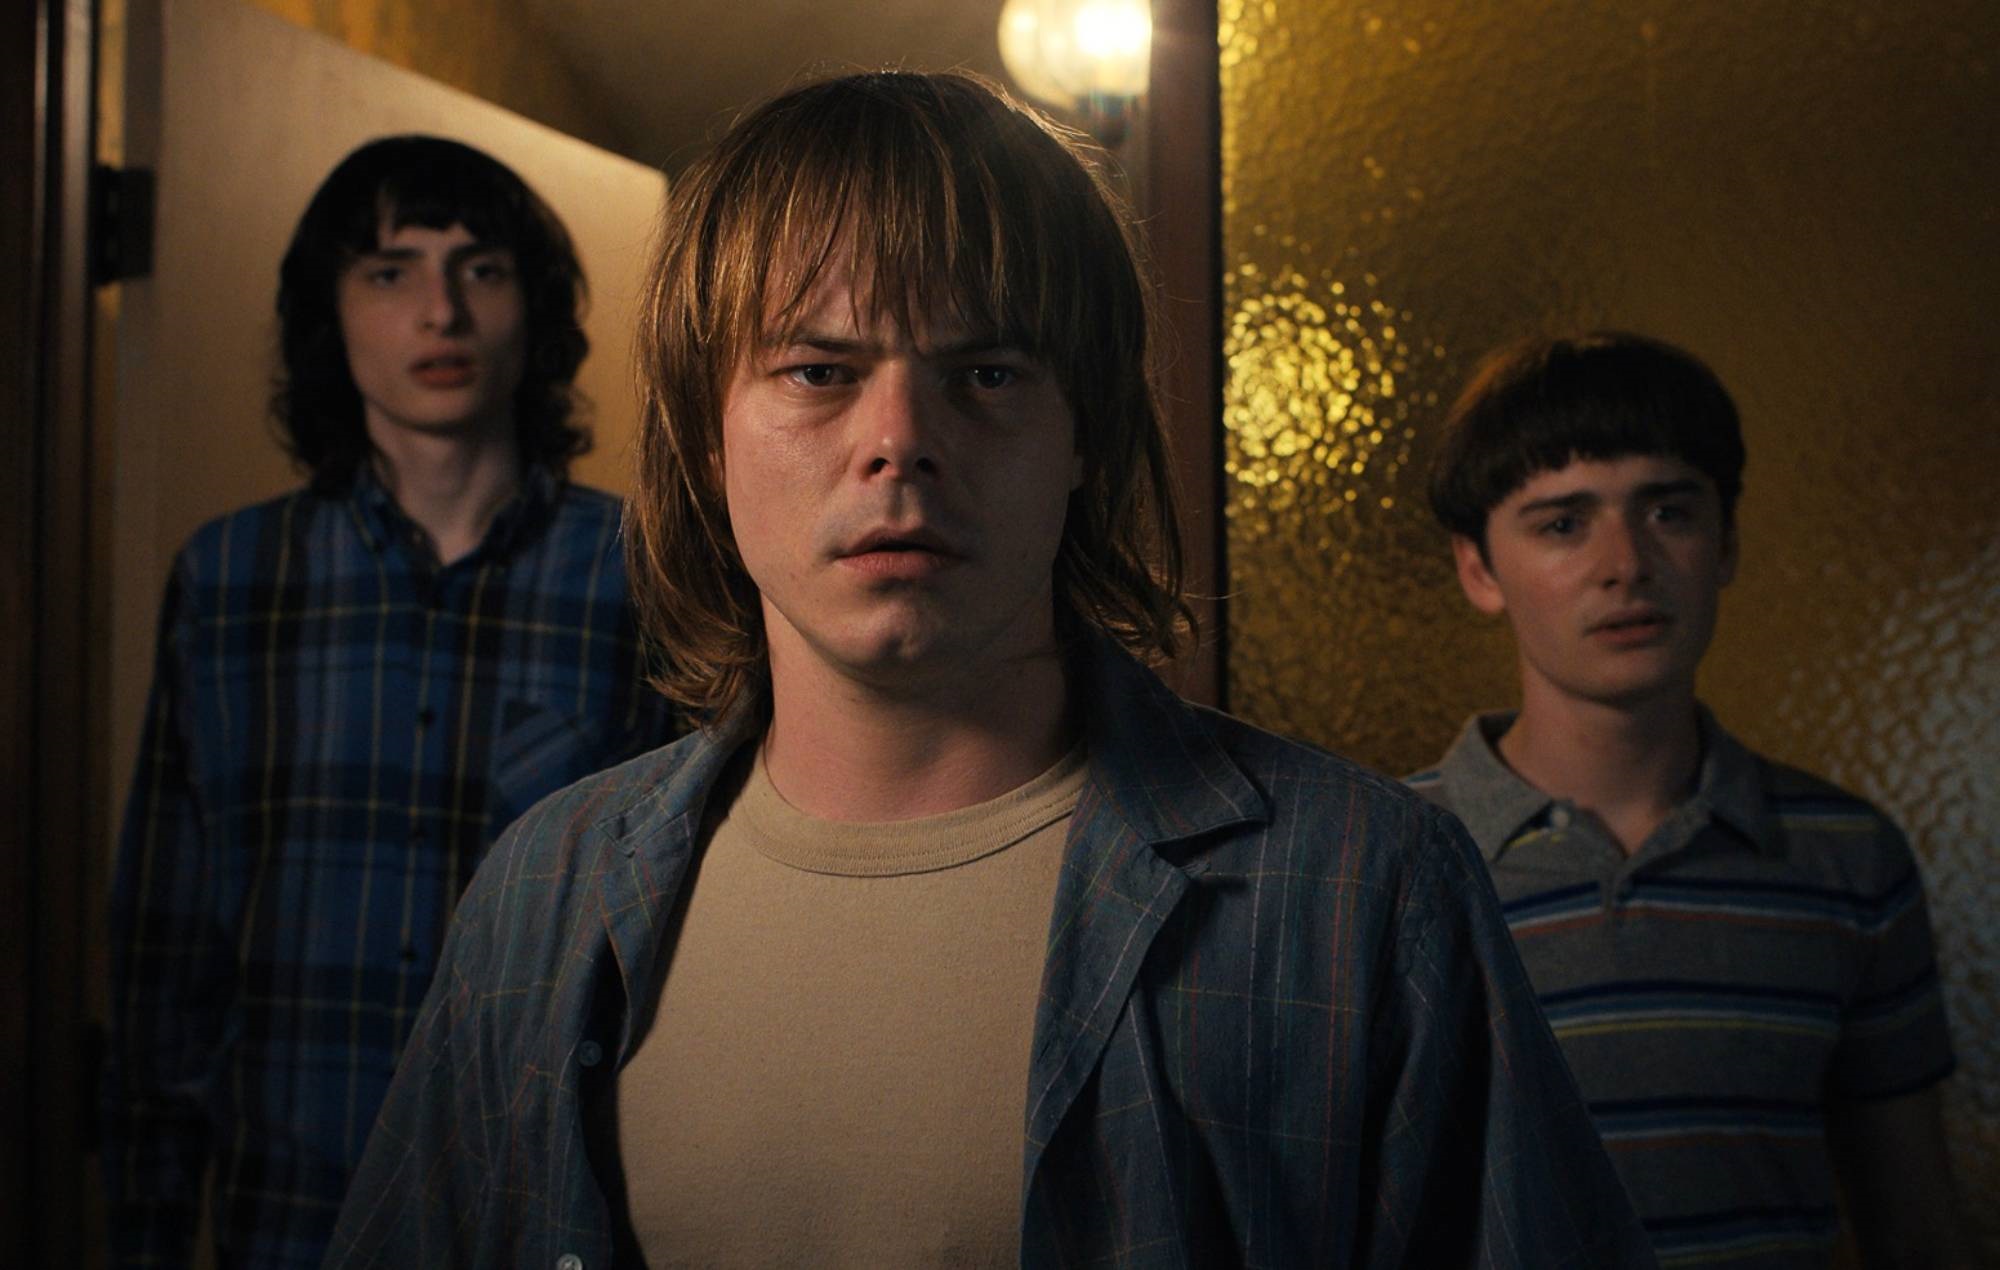 ‘Stranger Things’ fans think Jonathan Byers will get bigger role in season 5